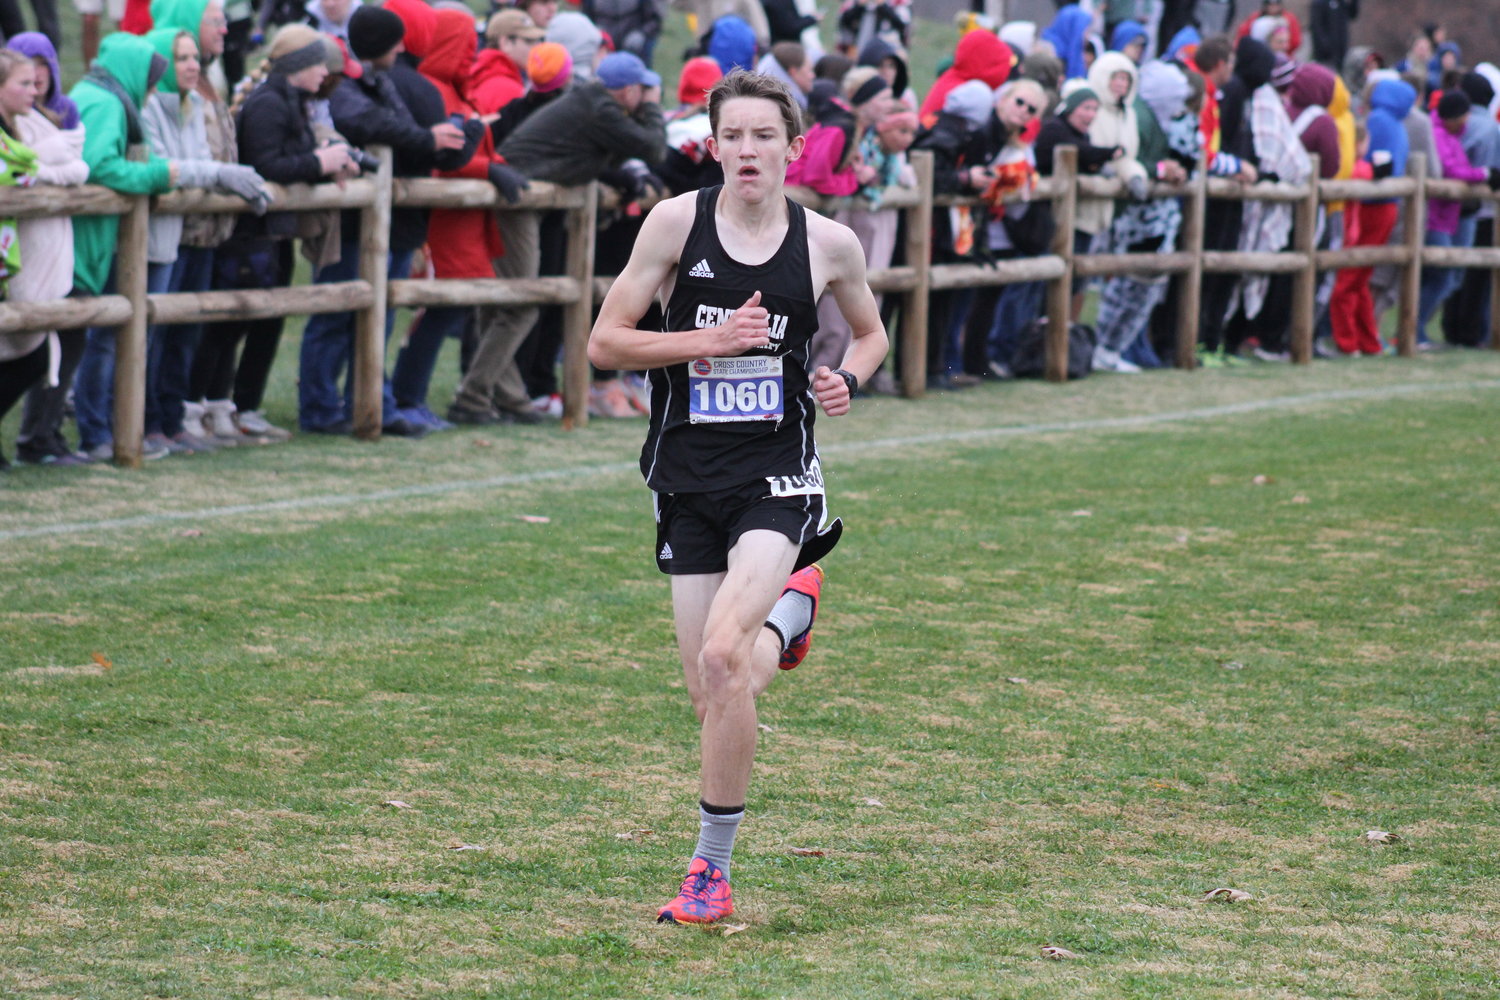 Centralia sophomore JR Lesher runs in the Class 3 state cross country meet last year. Lesher had a good start to his track season last week along with many other Centralia athletes.